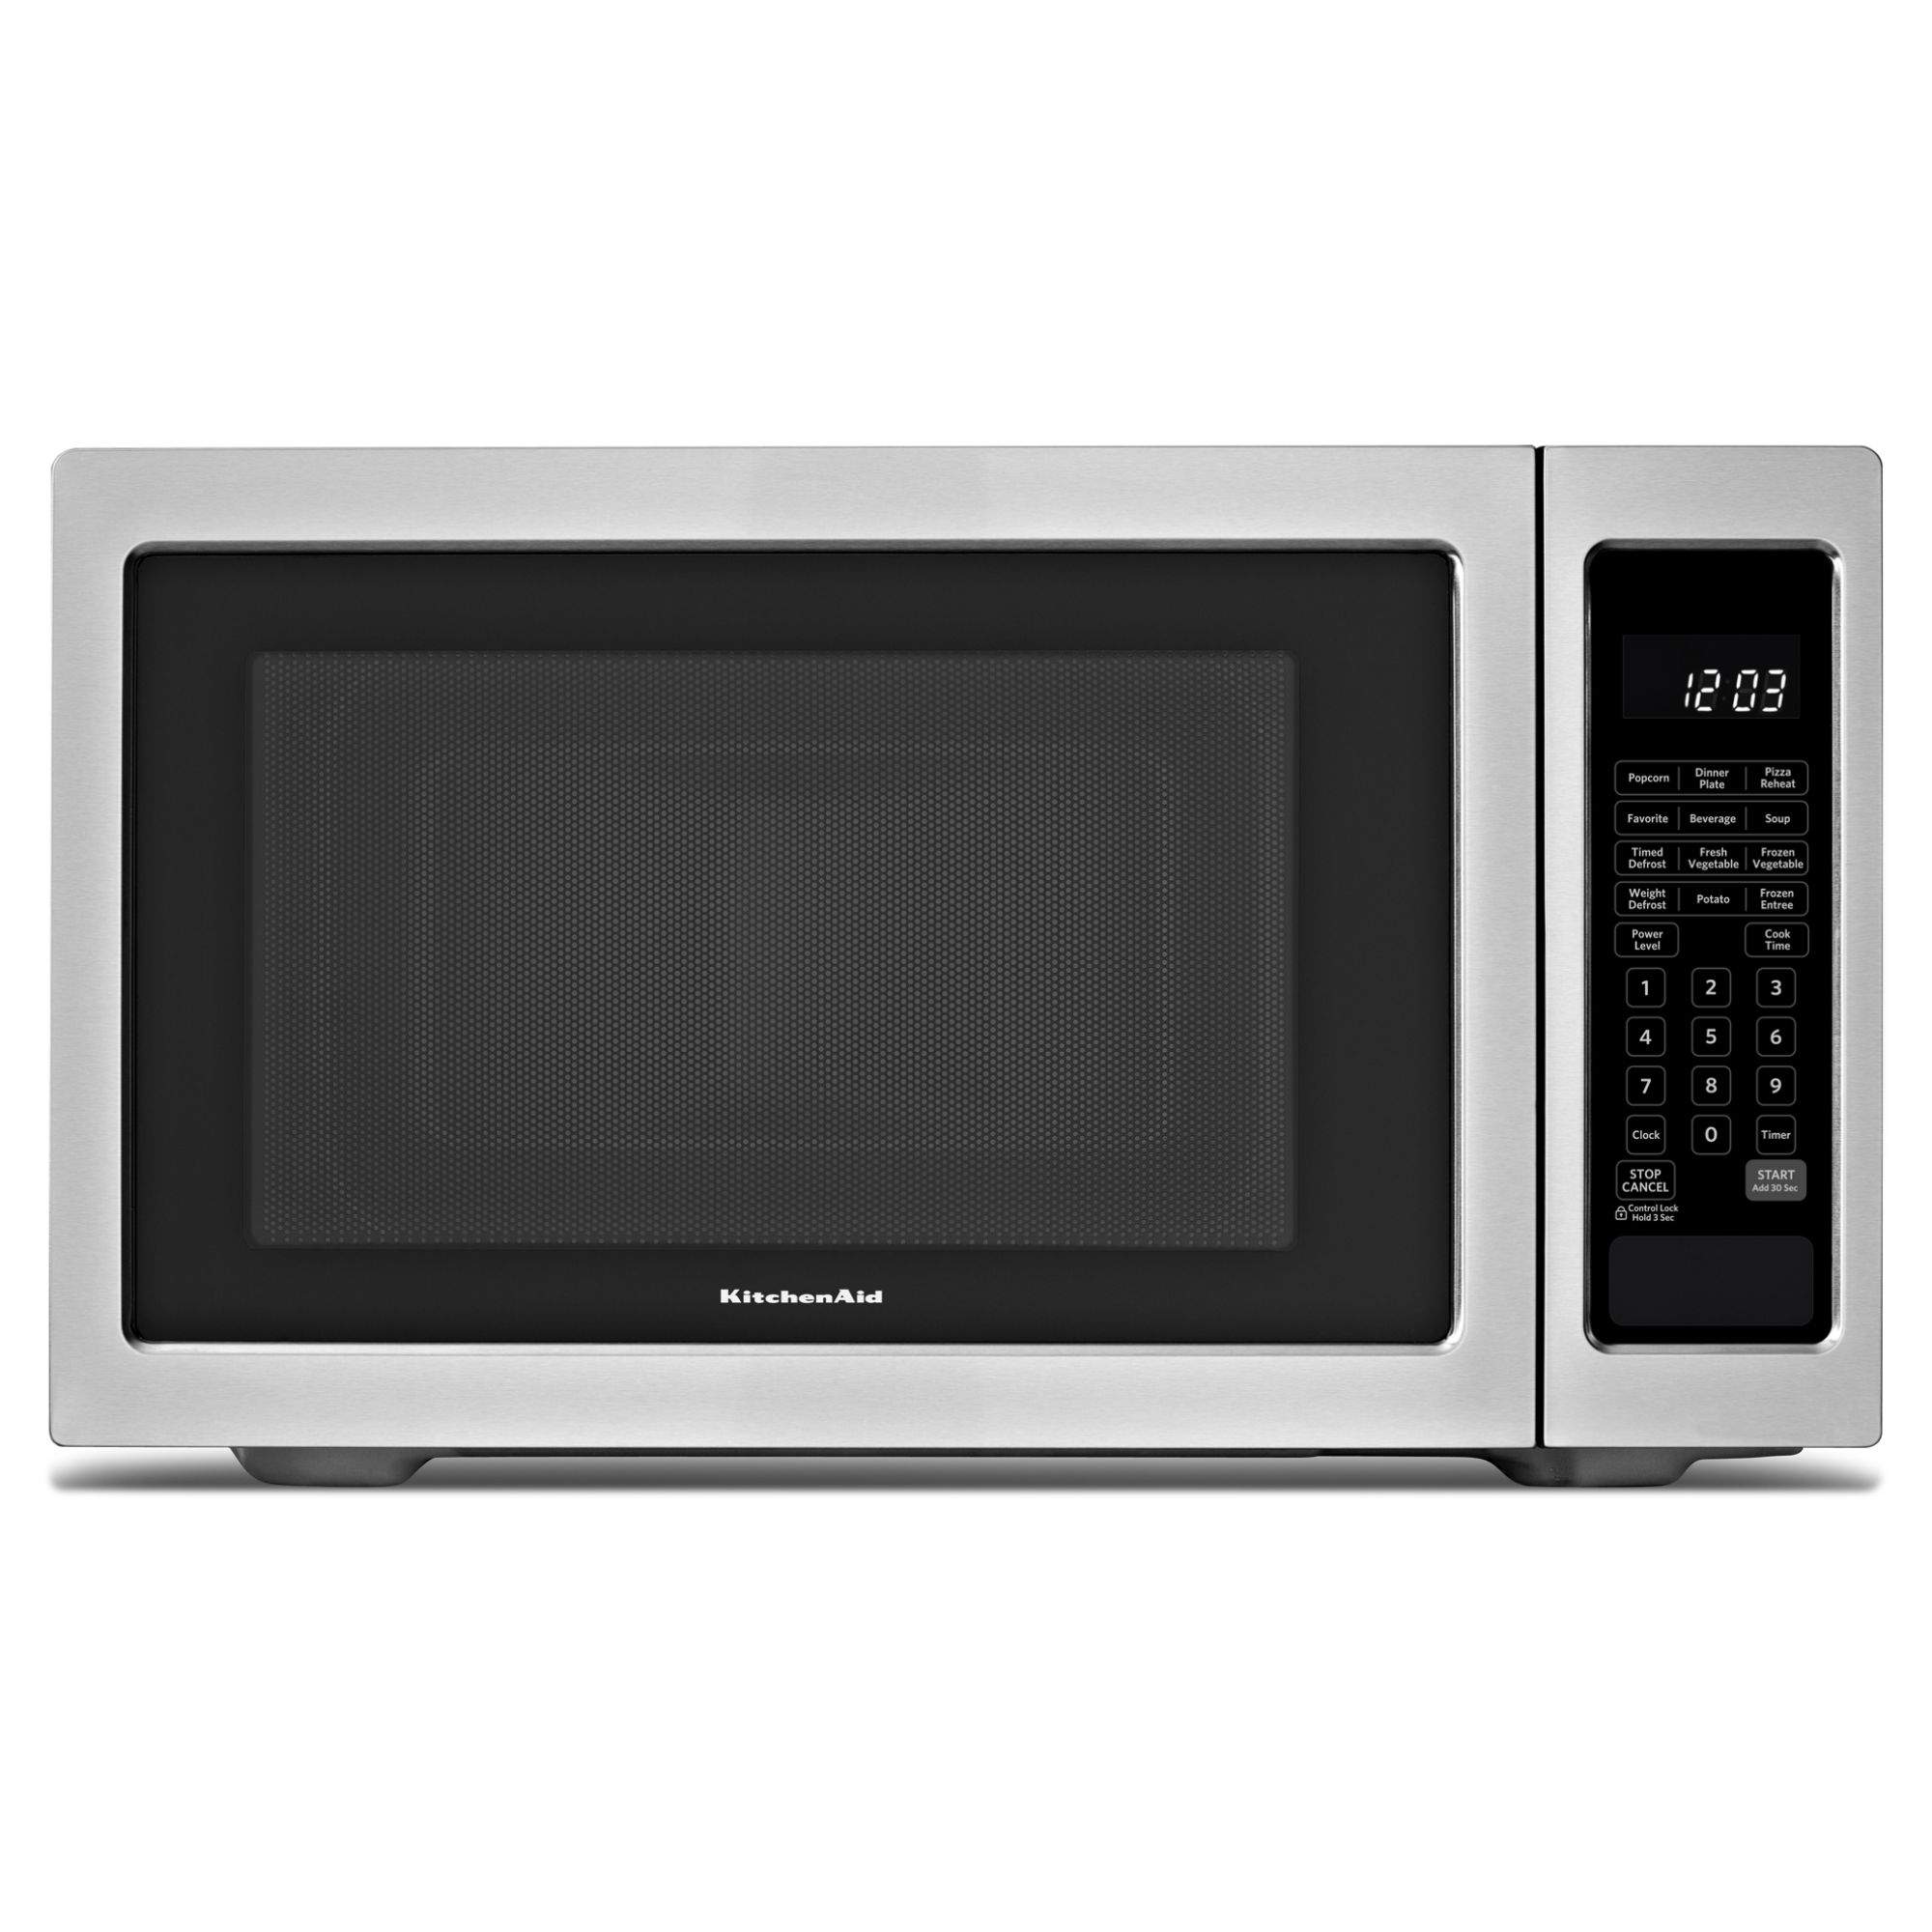 KitchenAid 1.6 cu. ft. 1,200W Countertop Microwave Oven - Stainless Steel